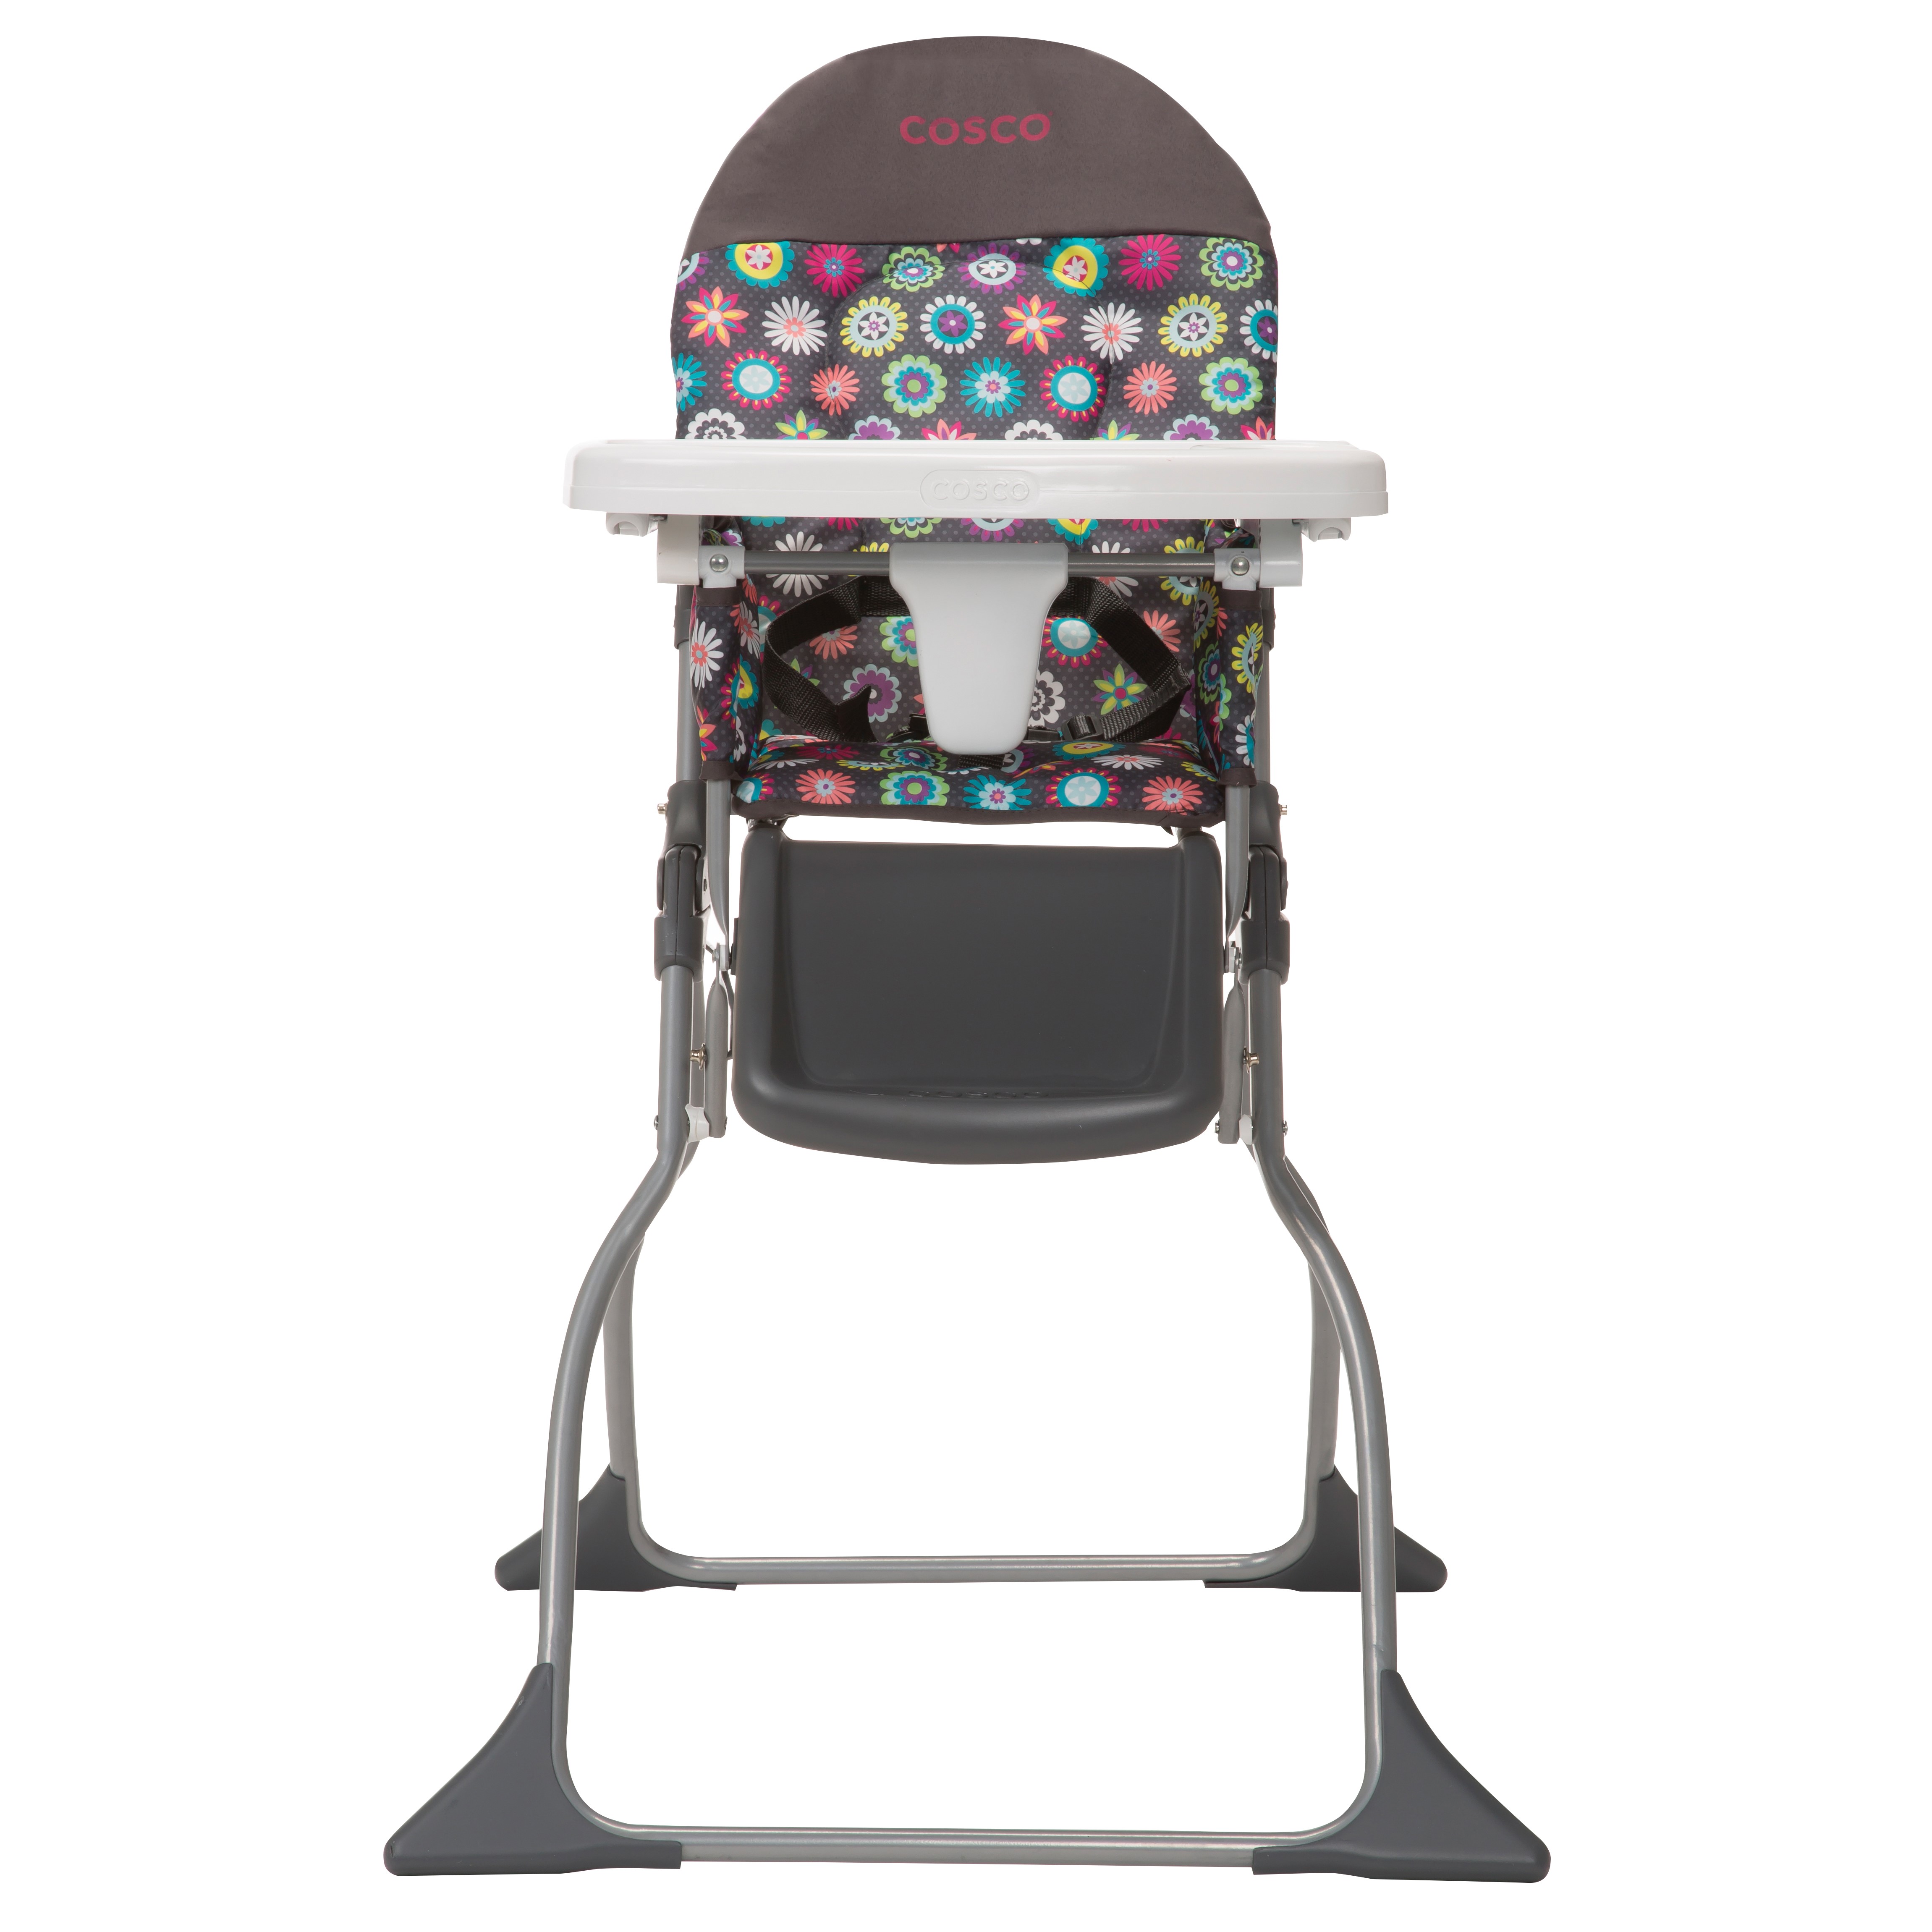 Cosco Simple Fold Full Size High Chair with Adjustable Tray, Bloom - image 1 of 5